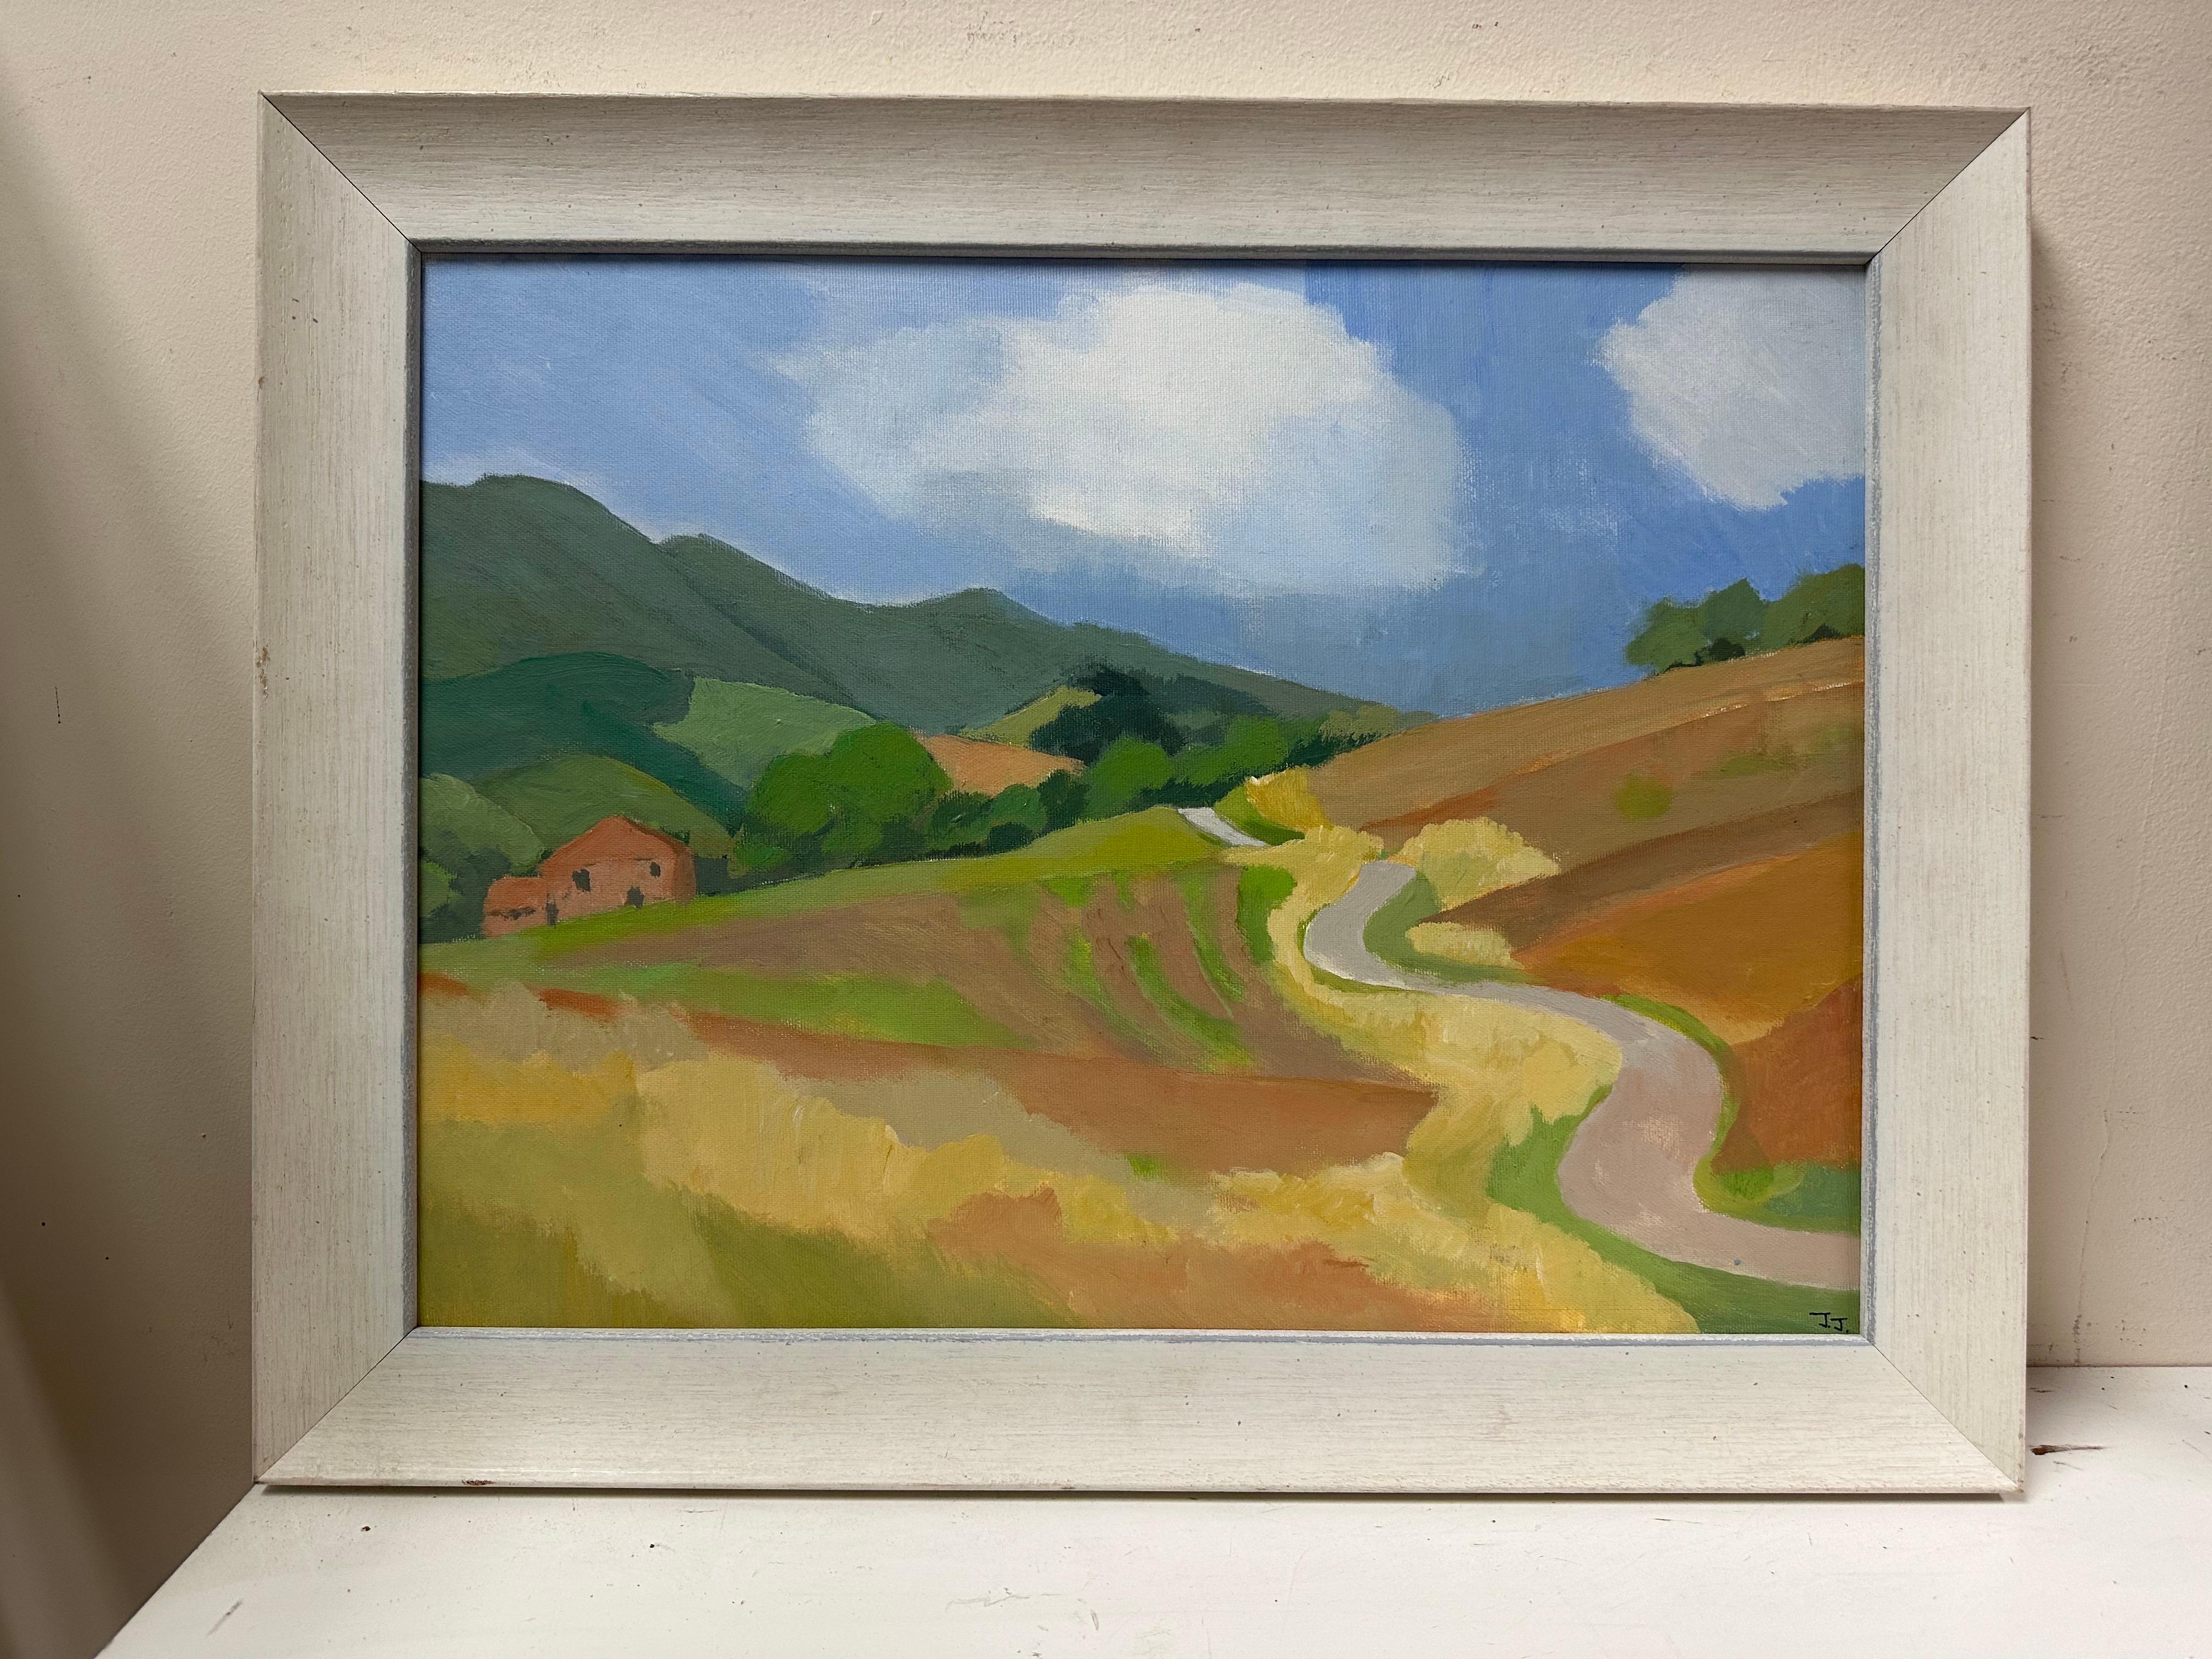 Artist/ School: Jill Jackson (British, contemporary)

Title: The Country Lane

Medium: oil on board, framed 

Framed: 17 x 22 inches
Painting : 14 x 18 inches

Provenance: all the paintings we have by this artist have come from a private collection